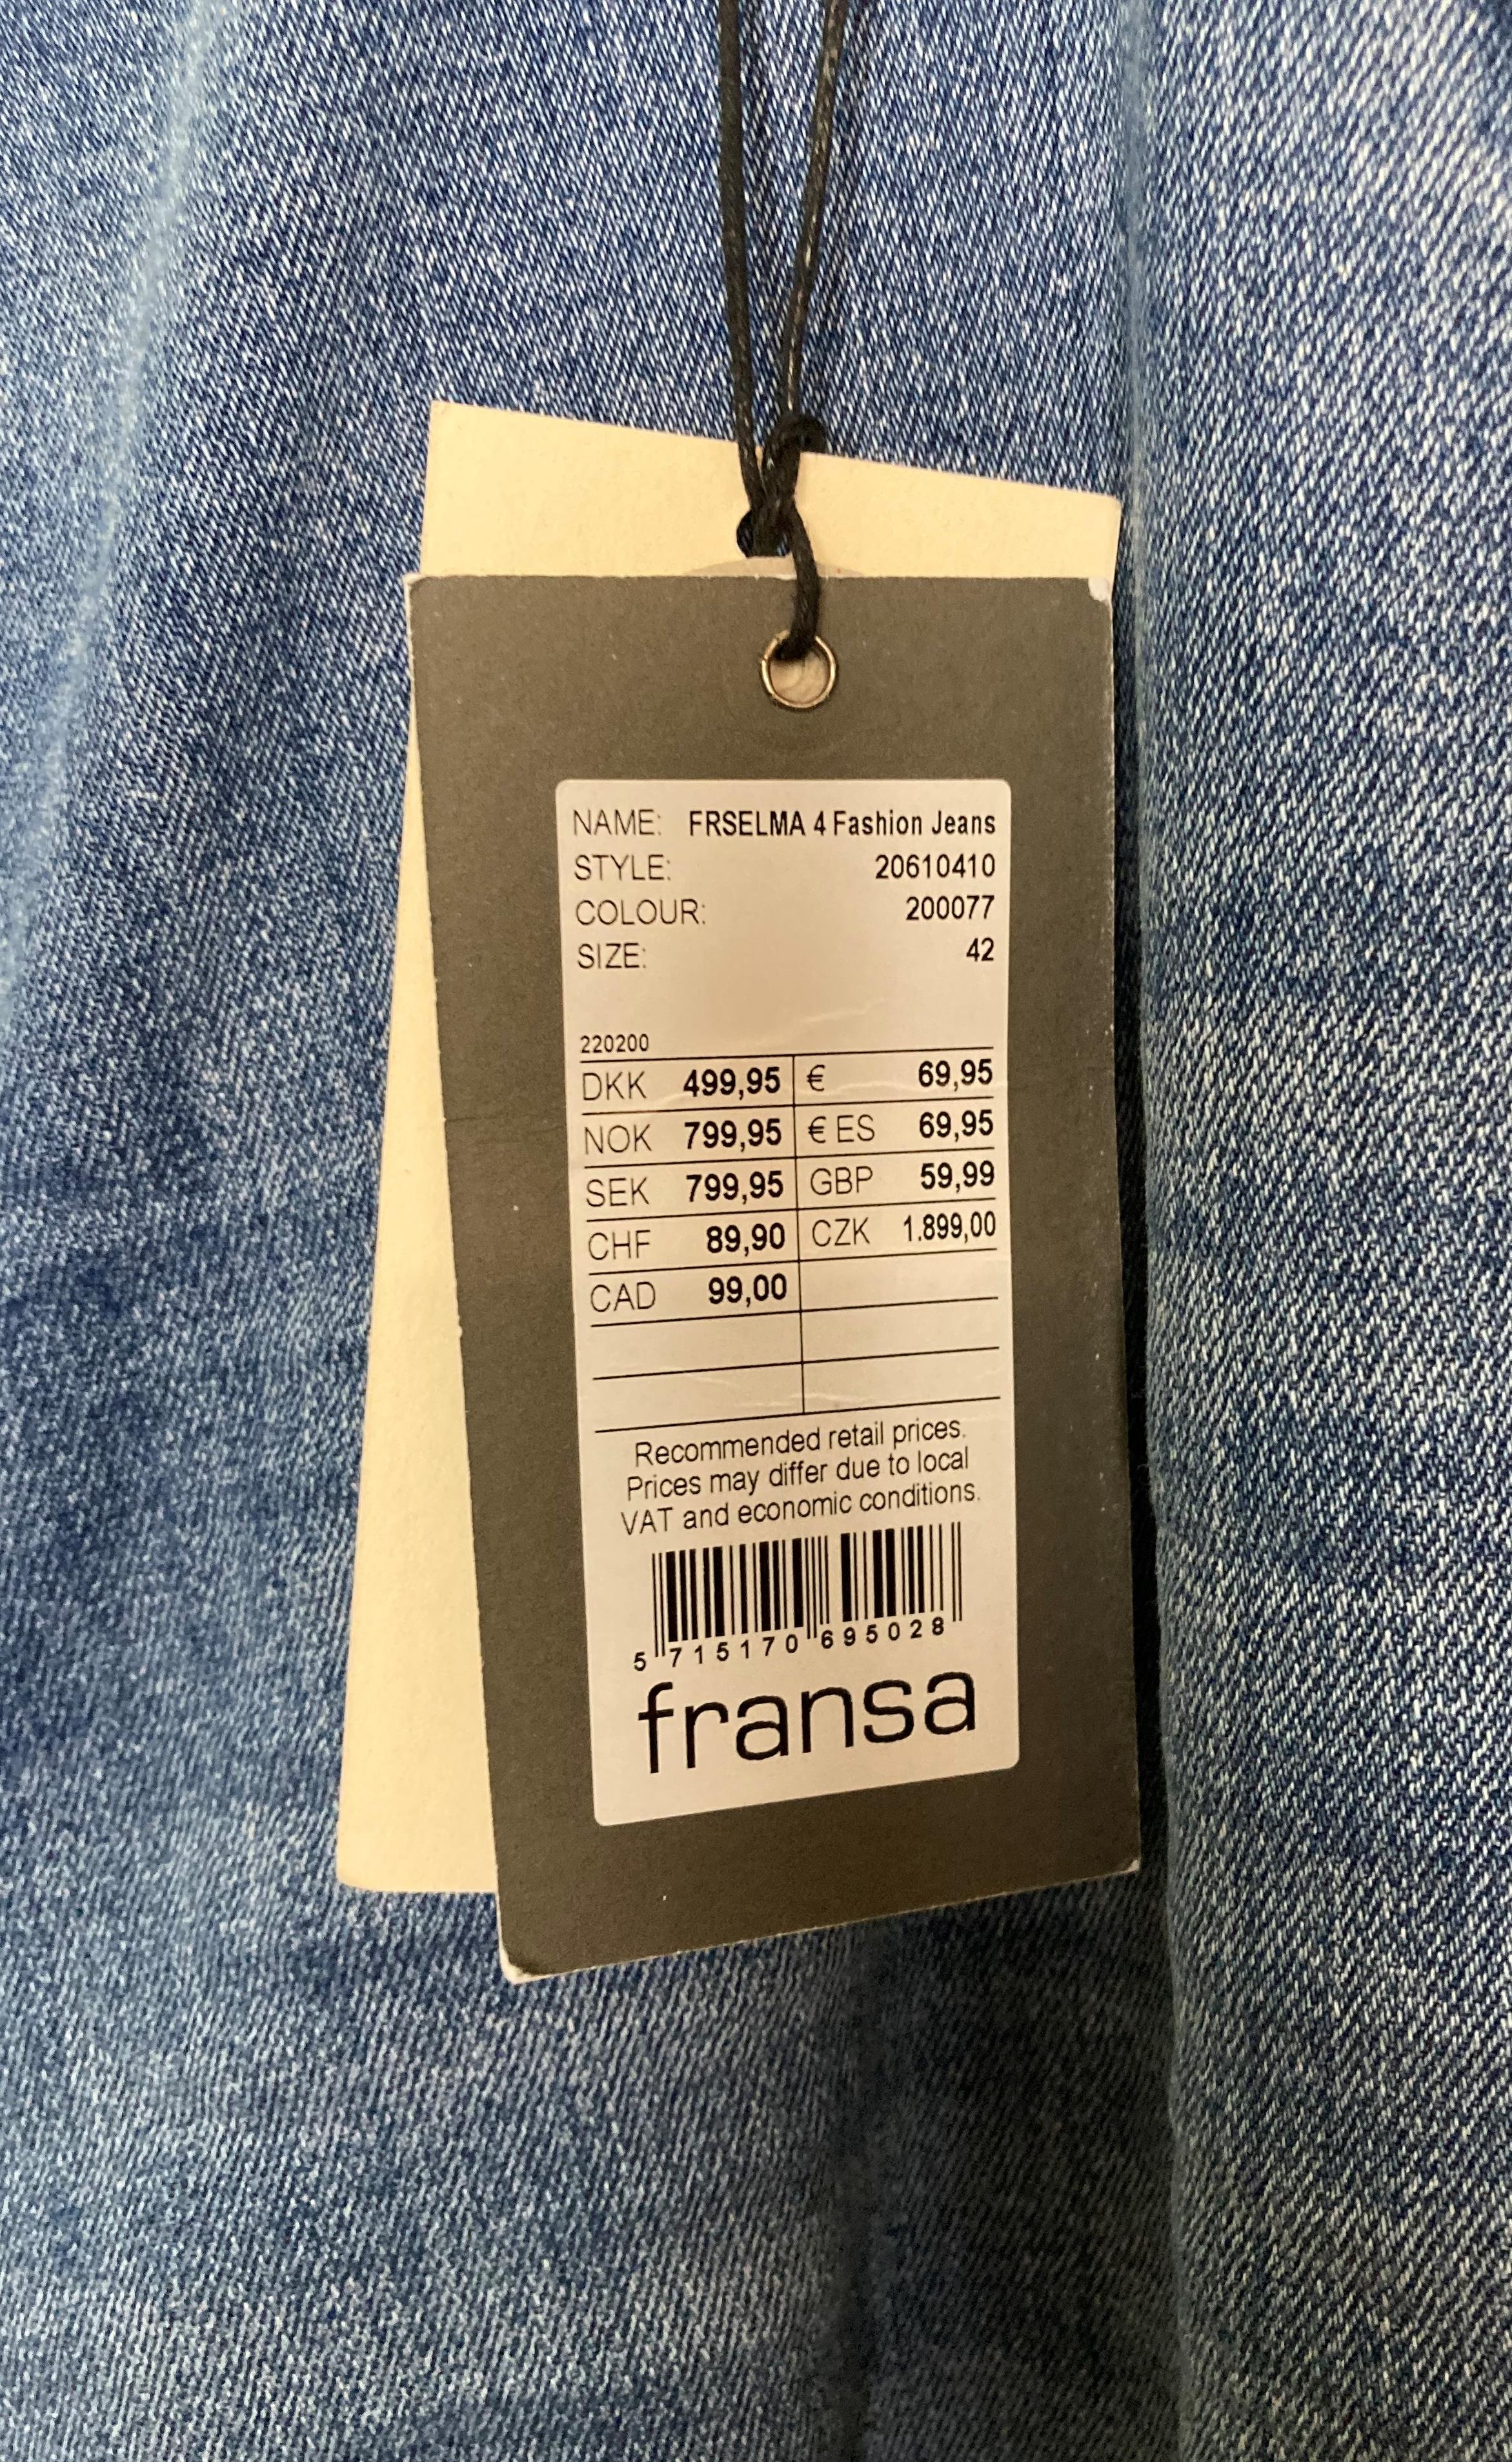 2 x pairs of FRANSA ladies Tokyo jeans in blue both size 42 - RRP: £59. - Image 2 of 3